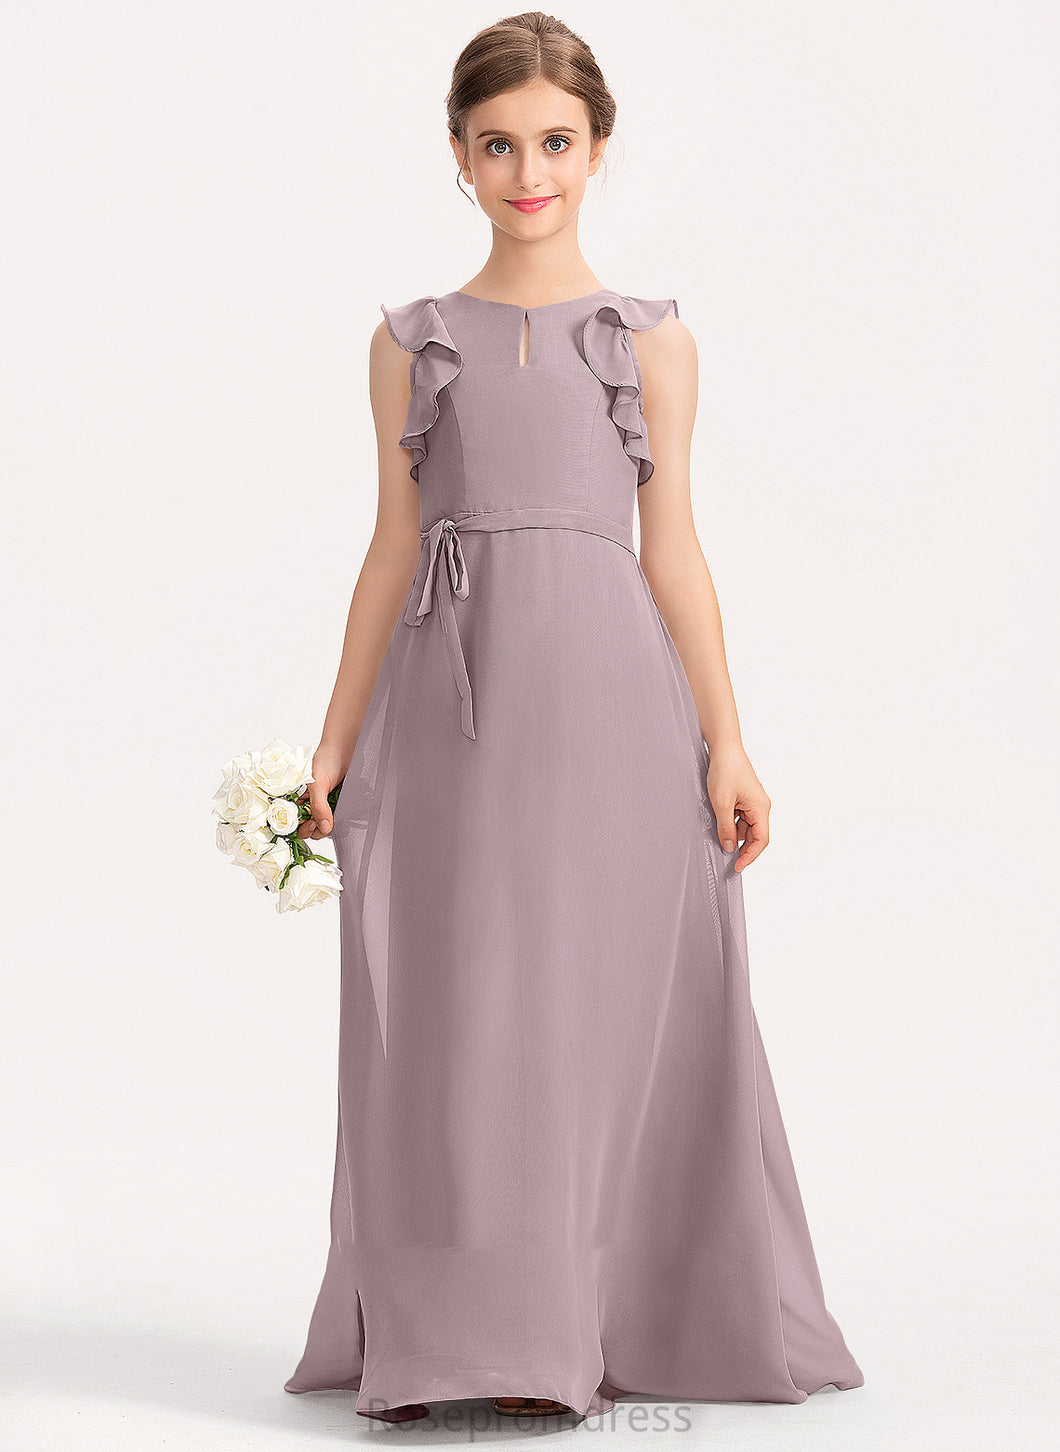 Junior Bridesmaid Dresses Floor-Length A-Line Isabell Cascading Scoop Neck With Chiffon Bow(s) Ruffles